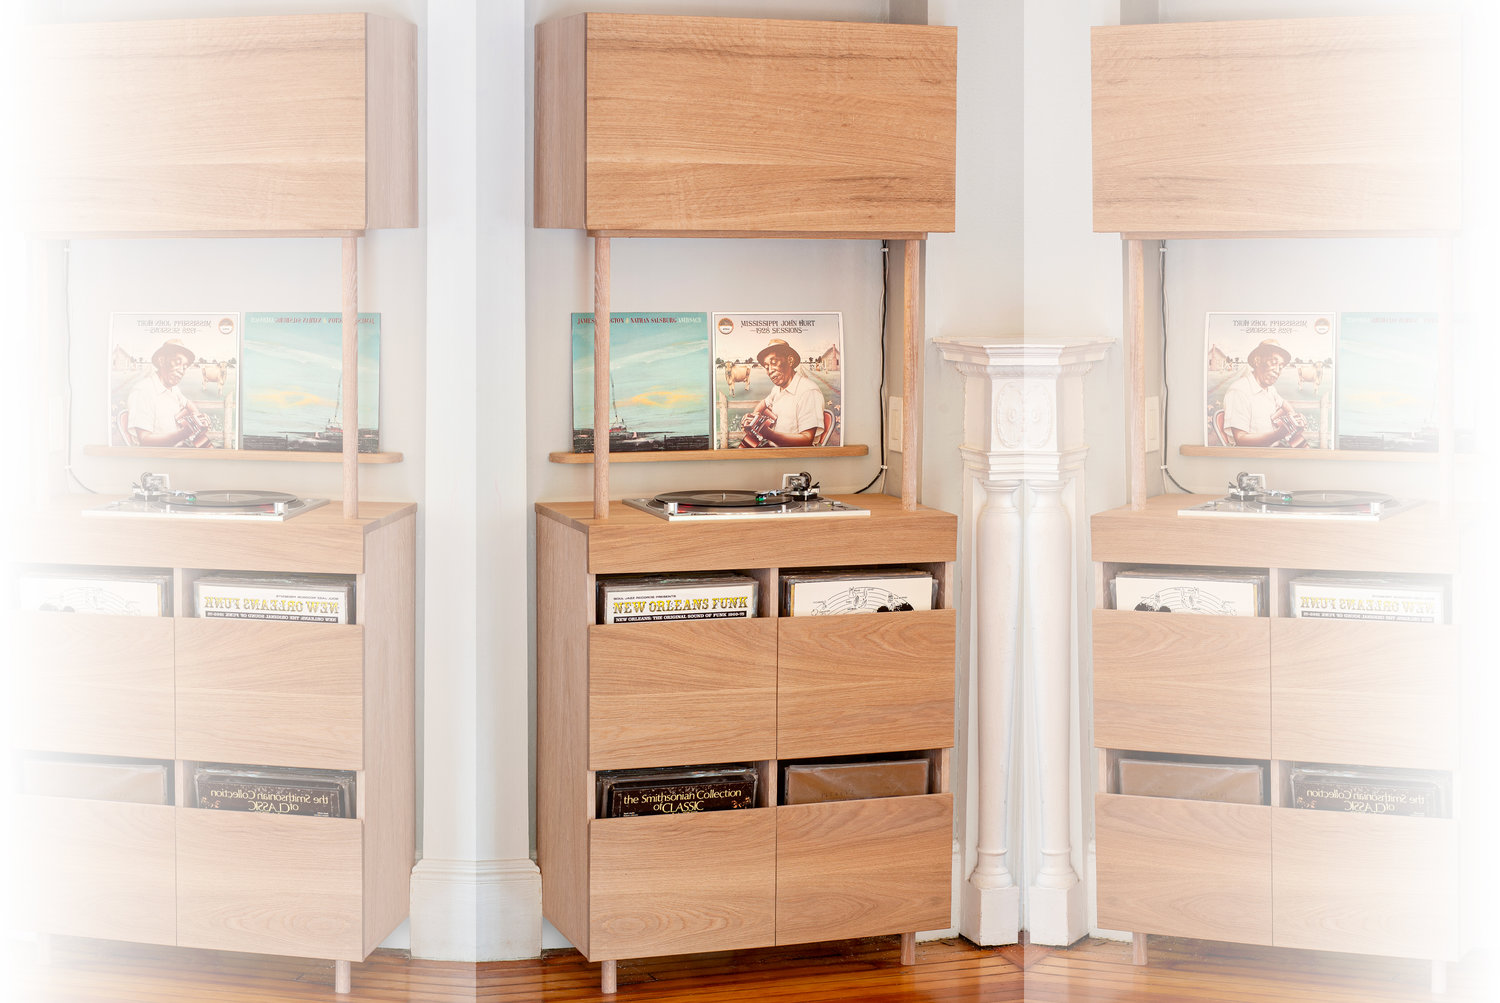 Built-in record cabinet featuring a recessed turntable, integrated no-touch lighting, and matching display shelf